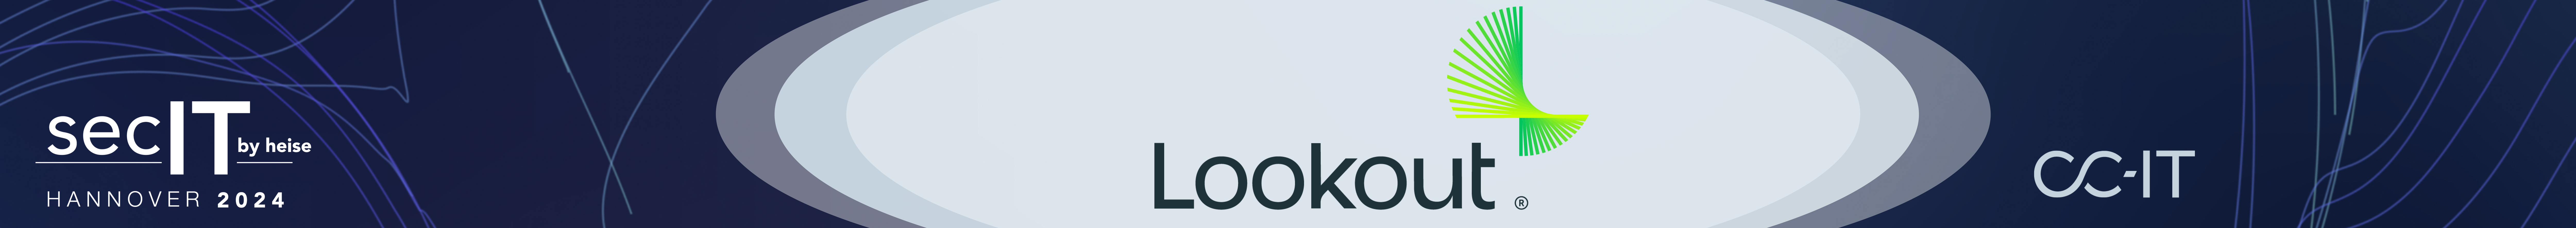 lookout-banner